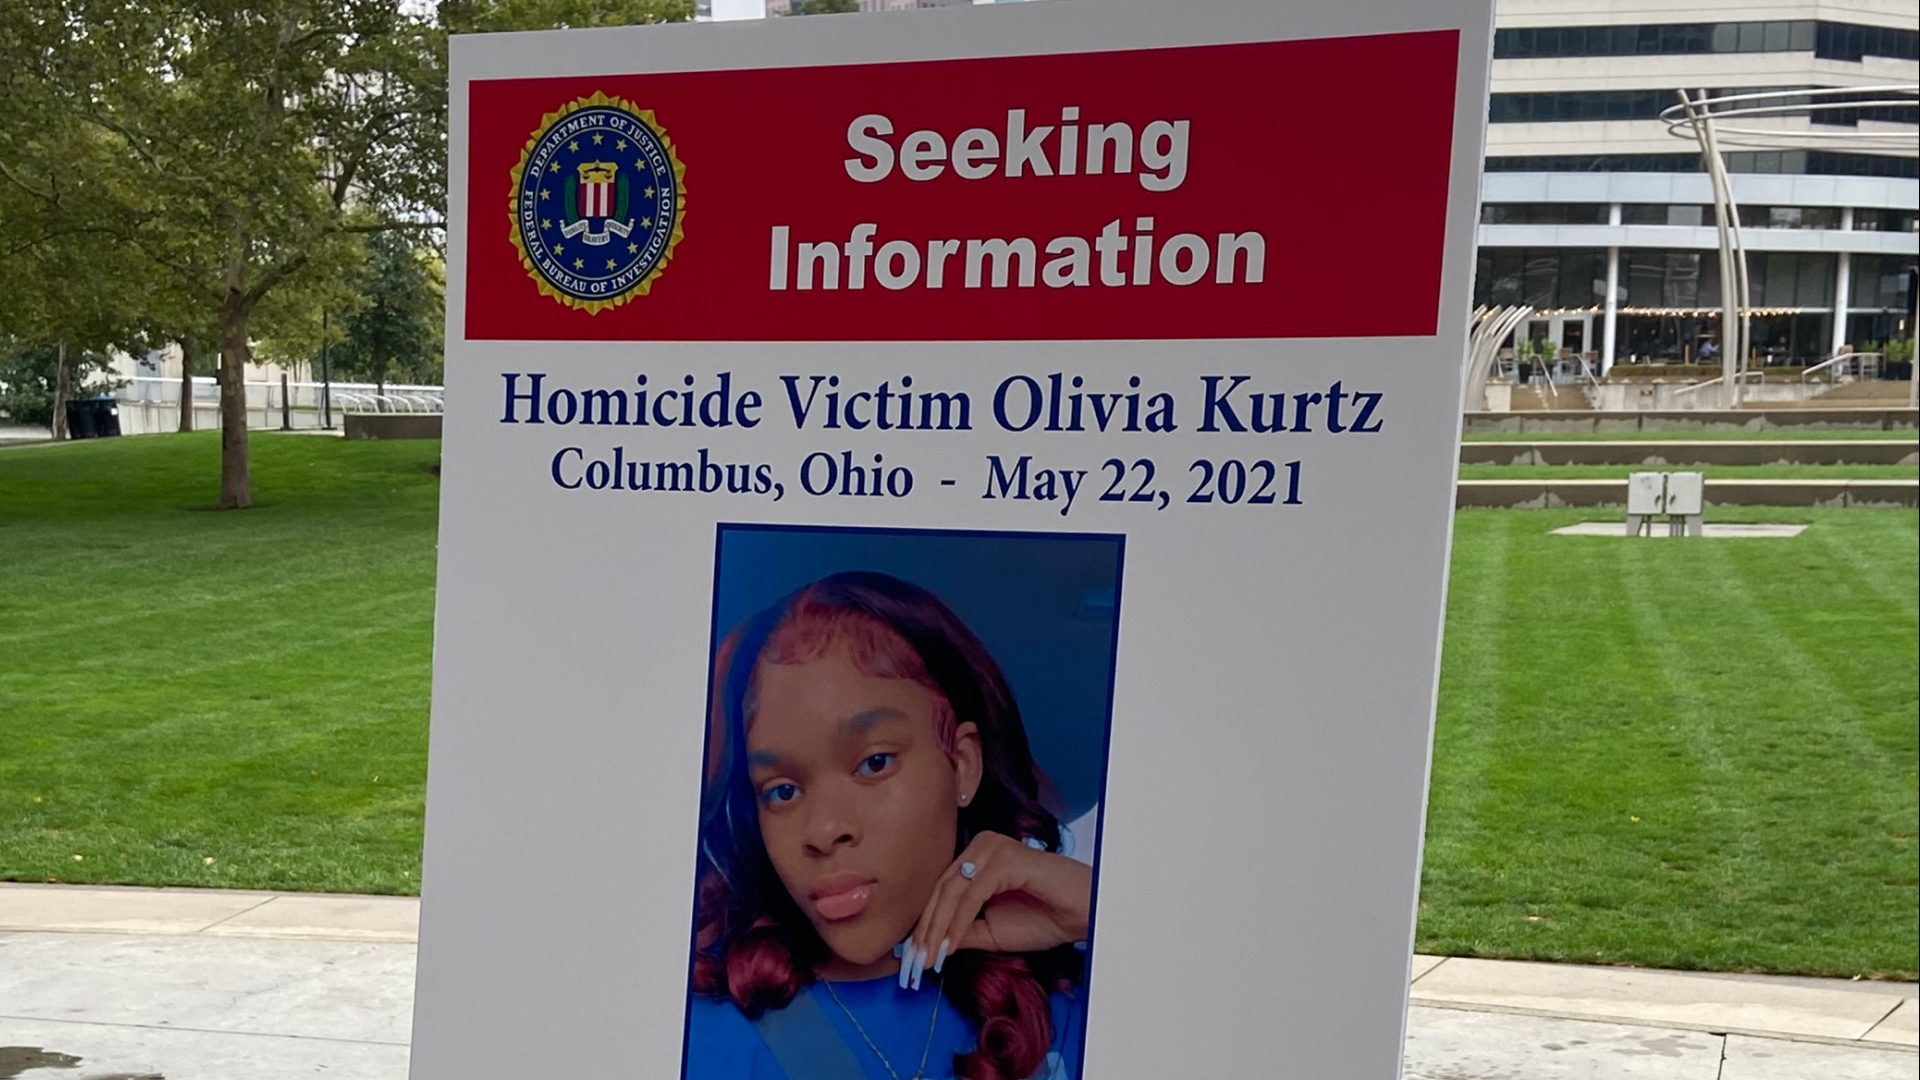 The FBI is offering a reward of up to $25,000 for information related to the fatal shooting of 16-year-old Olivia Kurtz at Bicentennial Park.